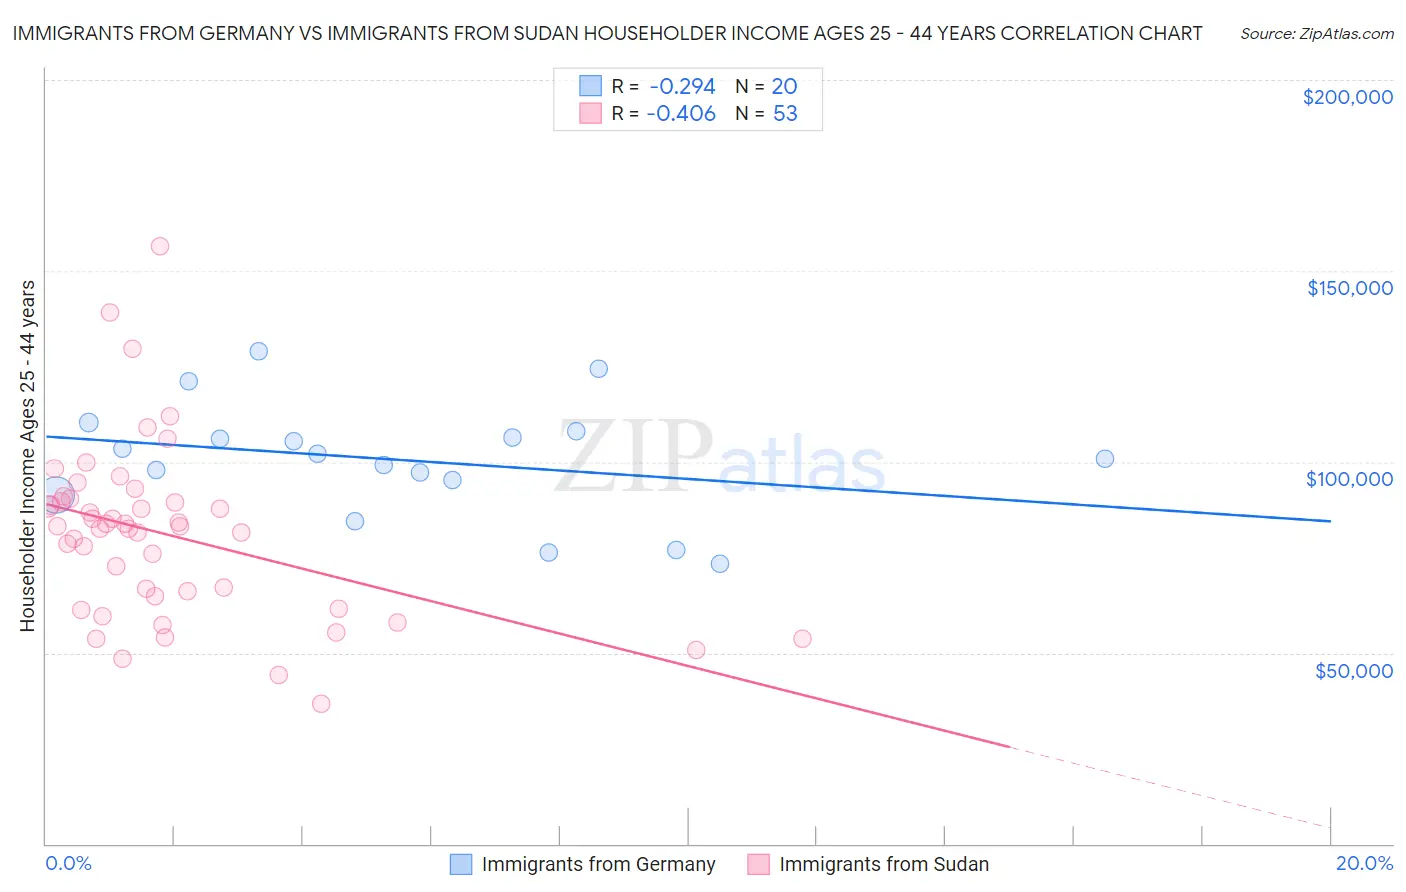 Immigrants from Germany vs Immigrants from Sudan Householder Income Ages 25 - 44 years